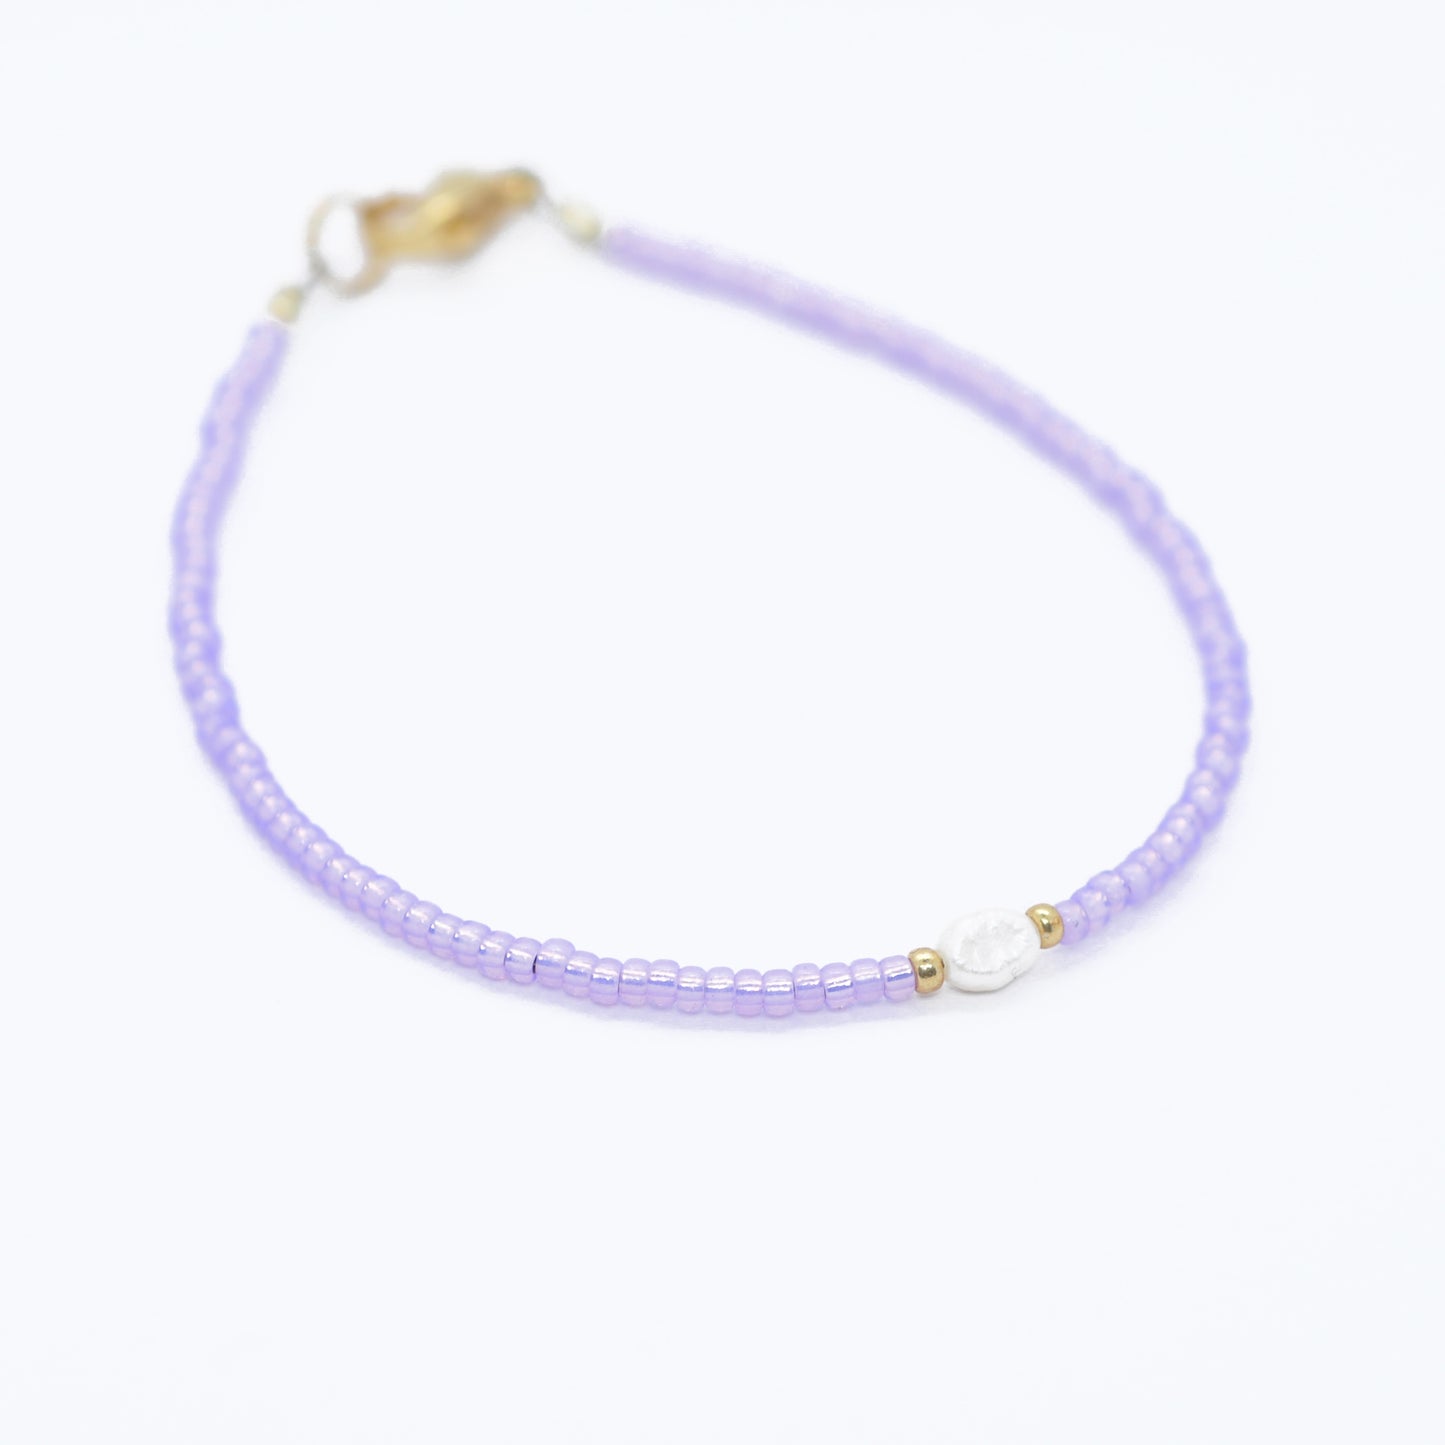 Bracelet / Violet Corsica / freshwater pearl / stainless steel gold plated